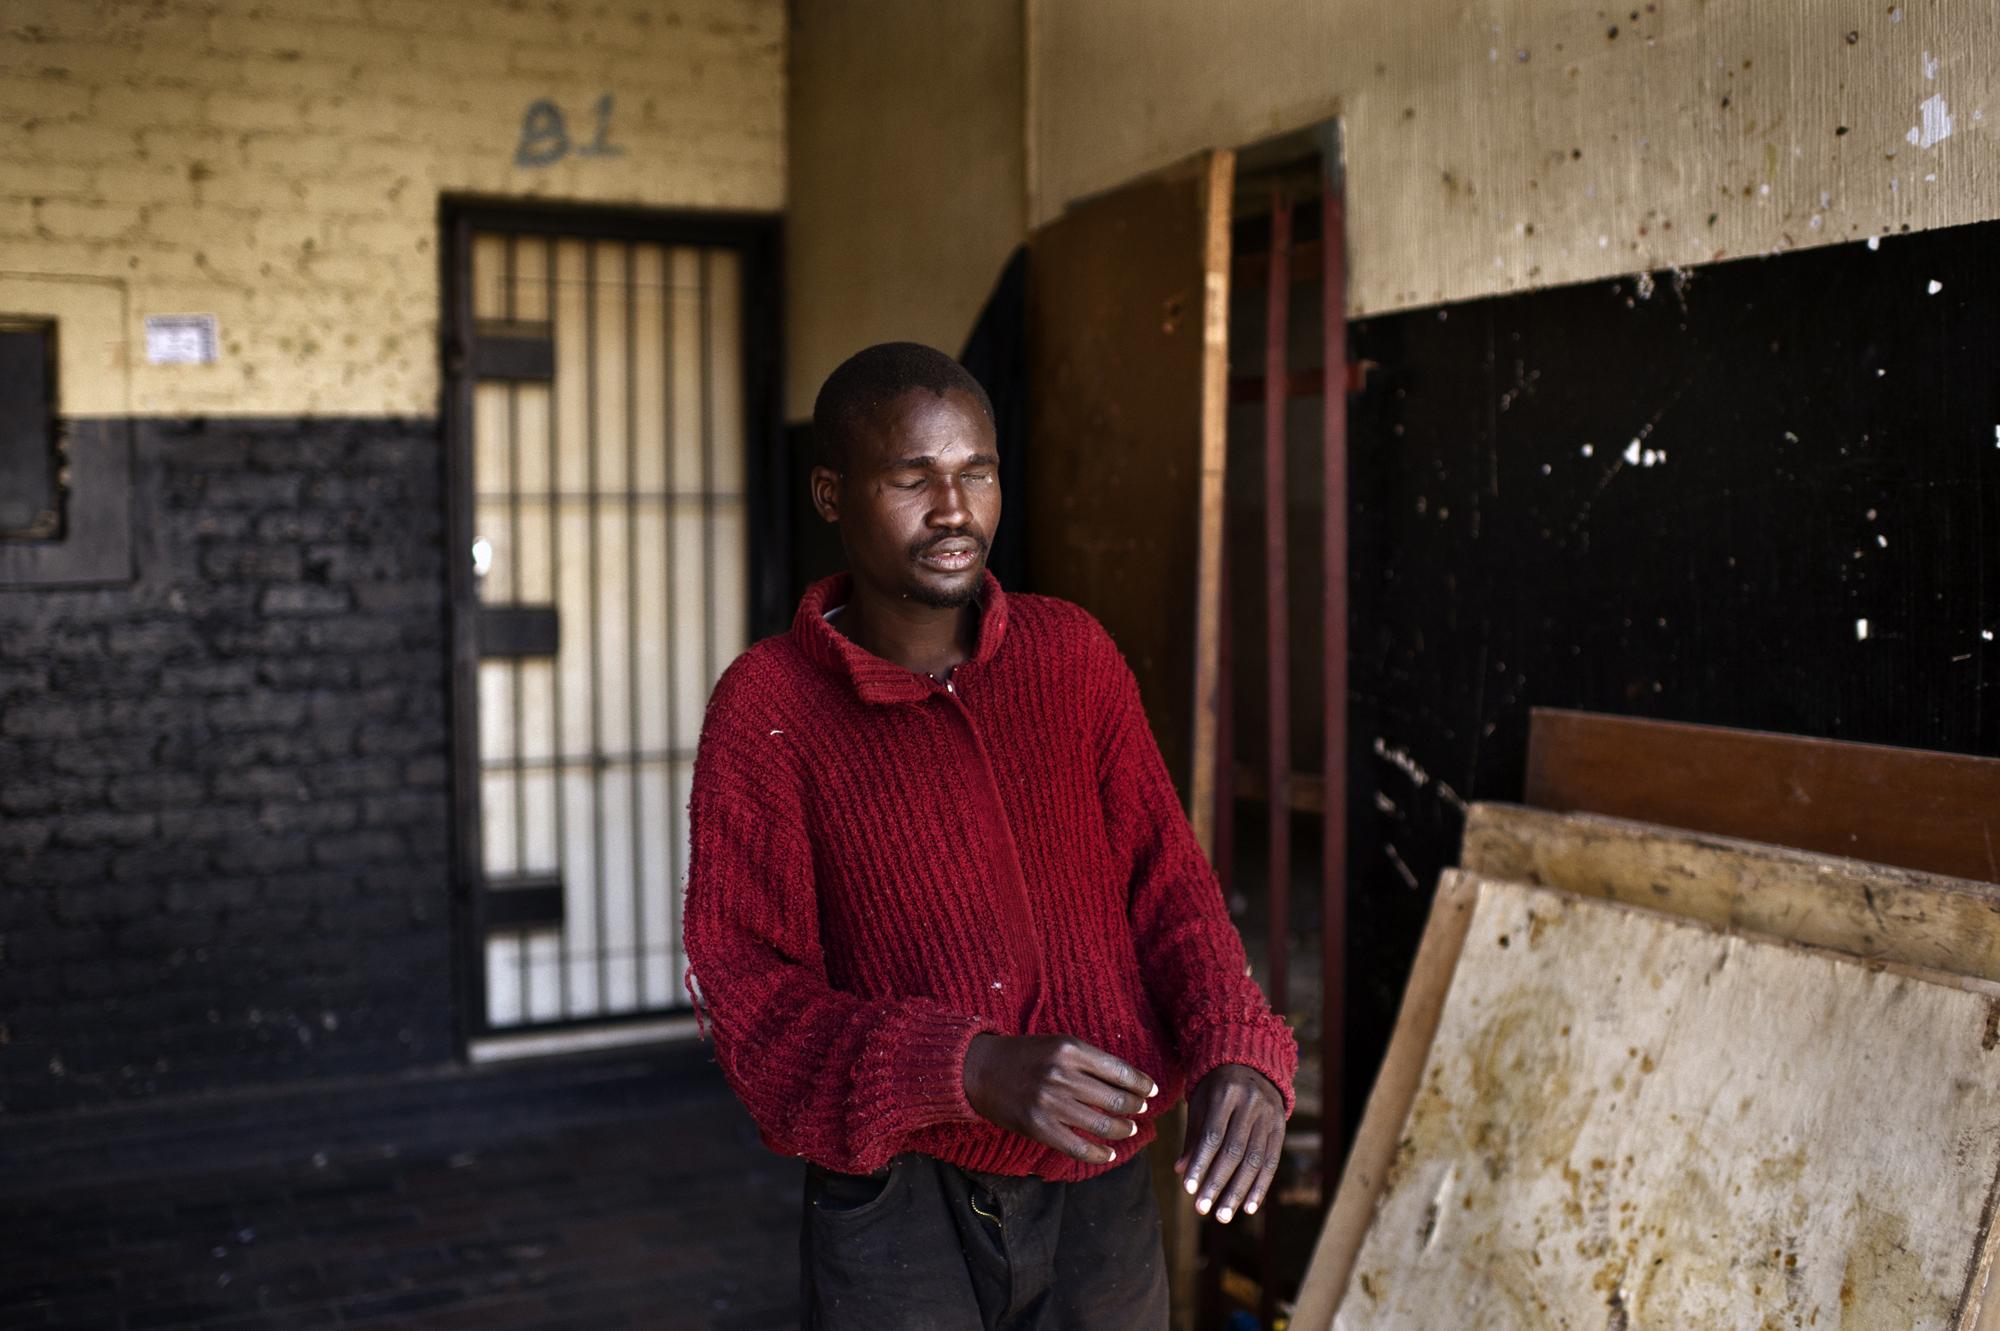 Into the shadows - Johannesburg, South Africa. June 2011. A blind Zimbabwean...